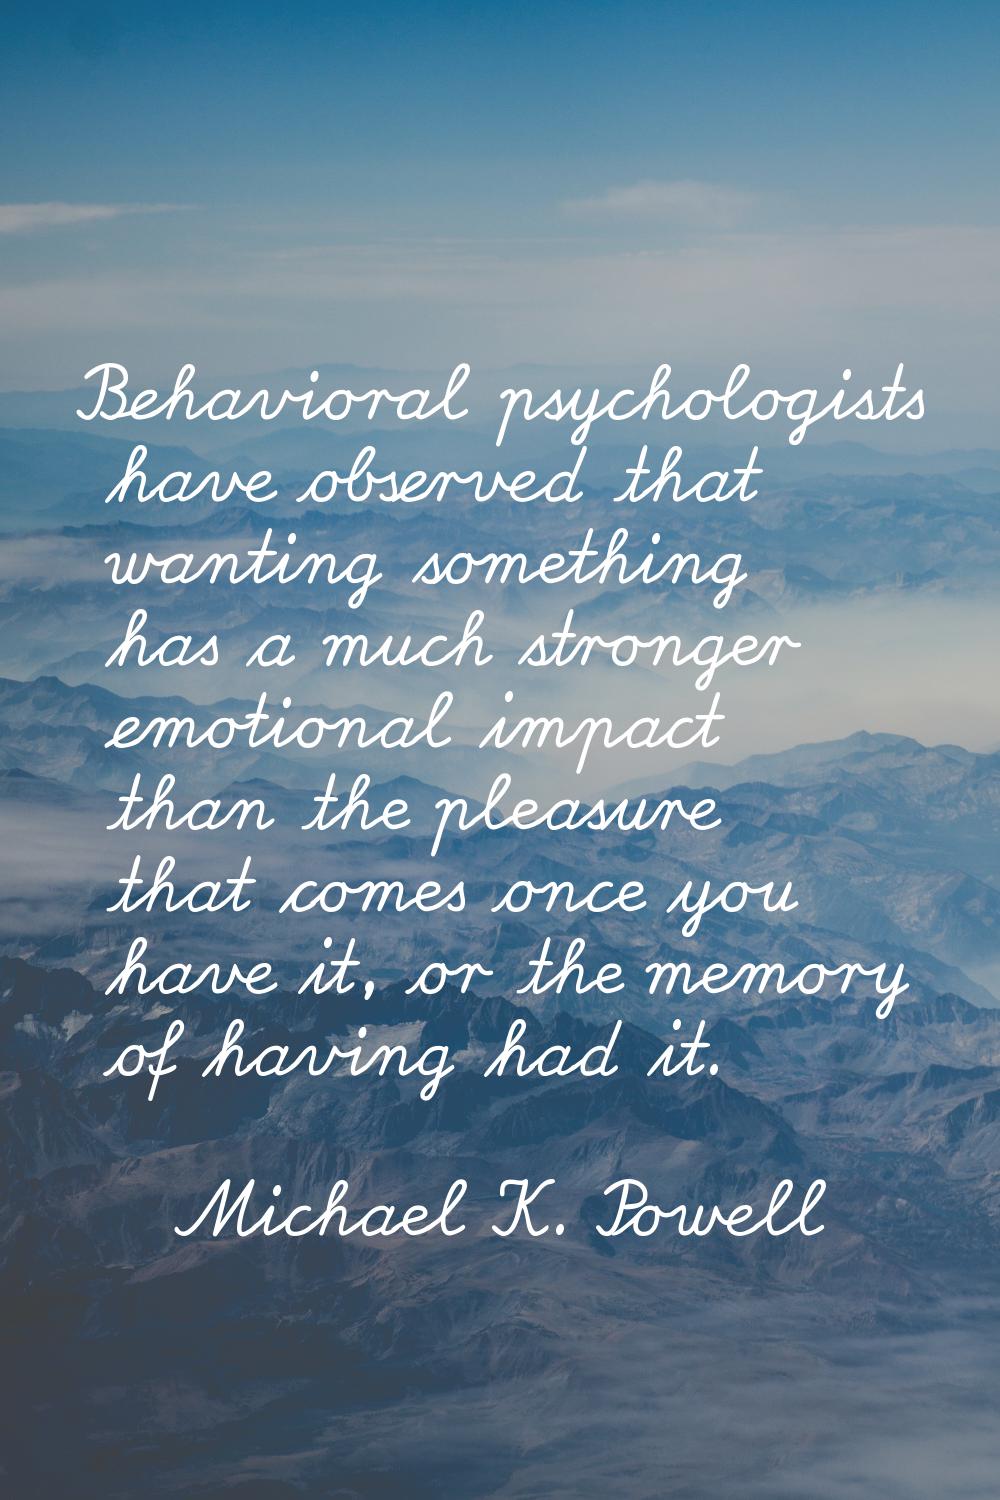 Behavioral psychologists have observed that wanting something has a much stronger emotional impact 